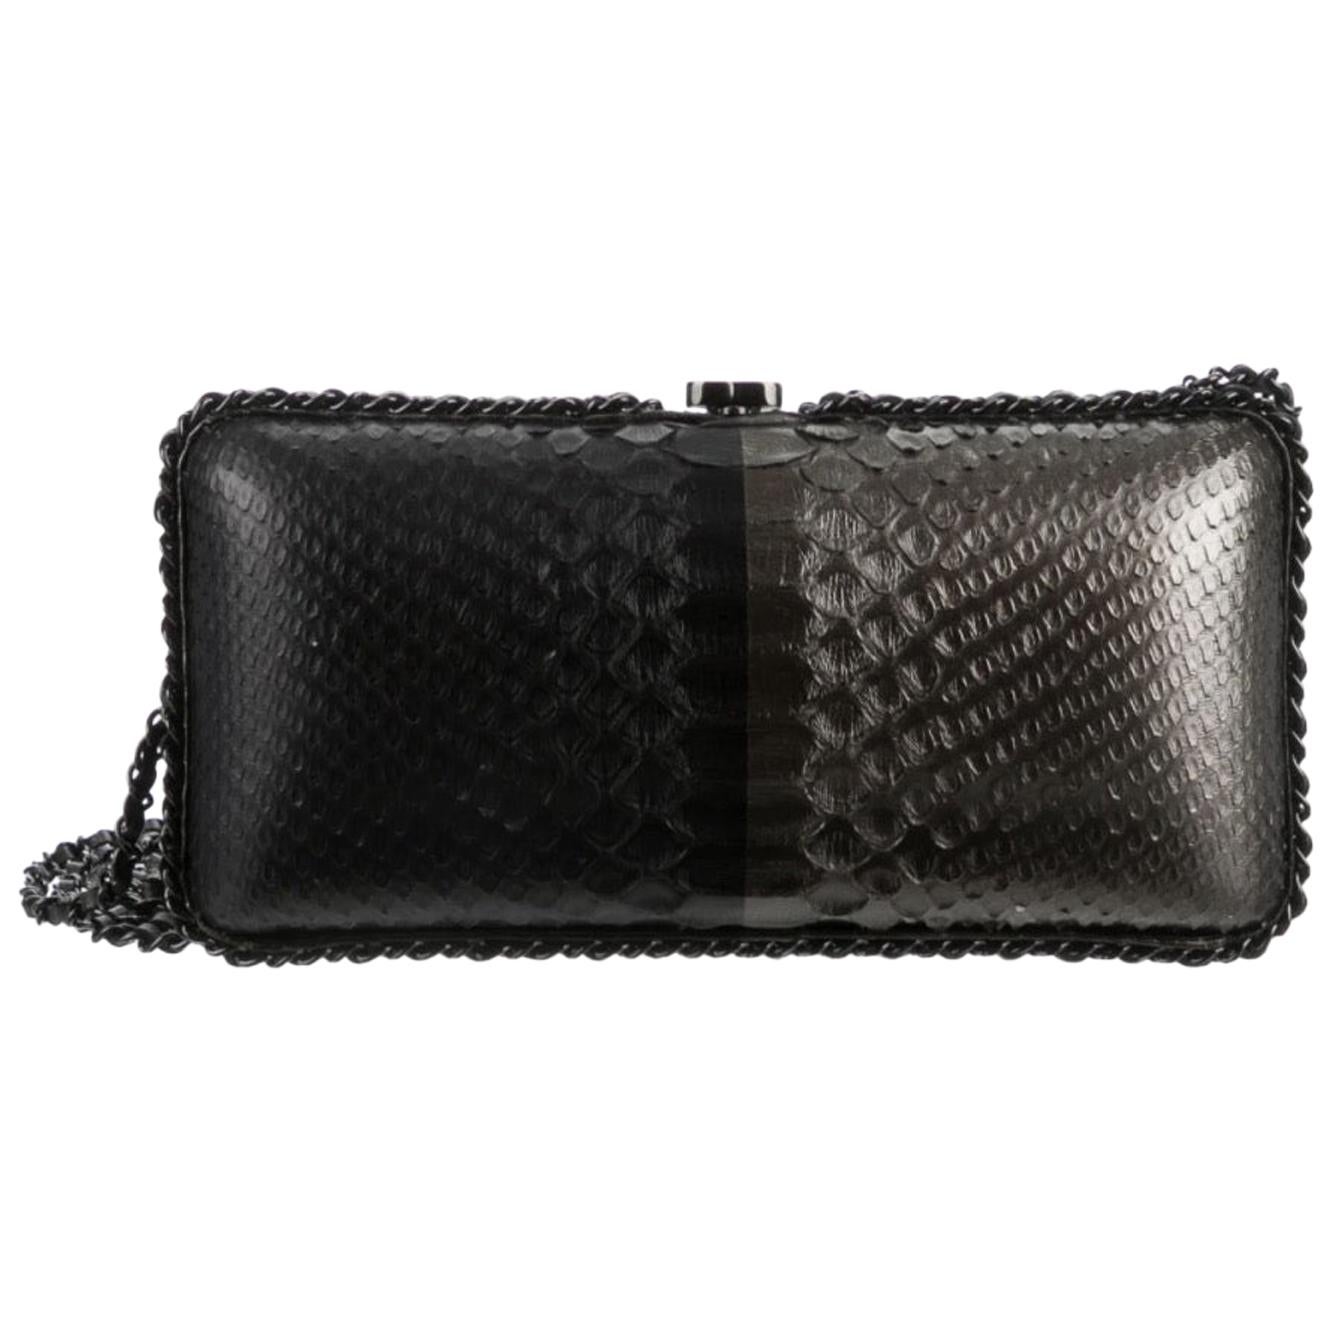 Chanel Black Gray Snakeskin Exotic Leather Small Evening Clutch Shoulder Bag